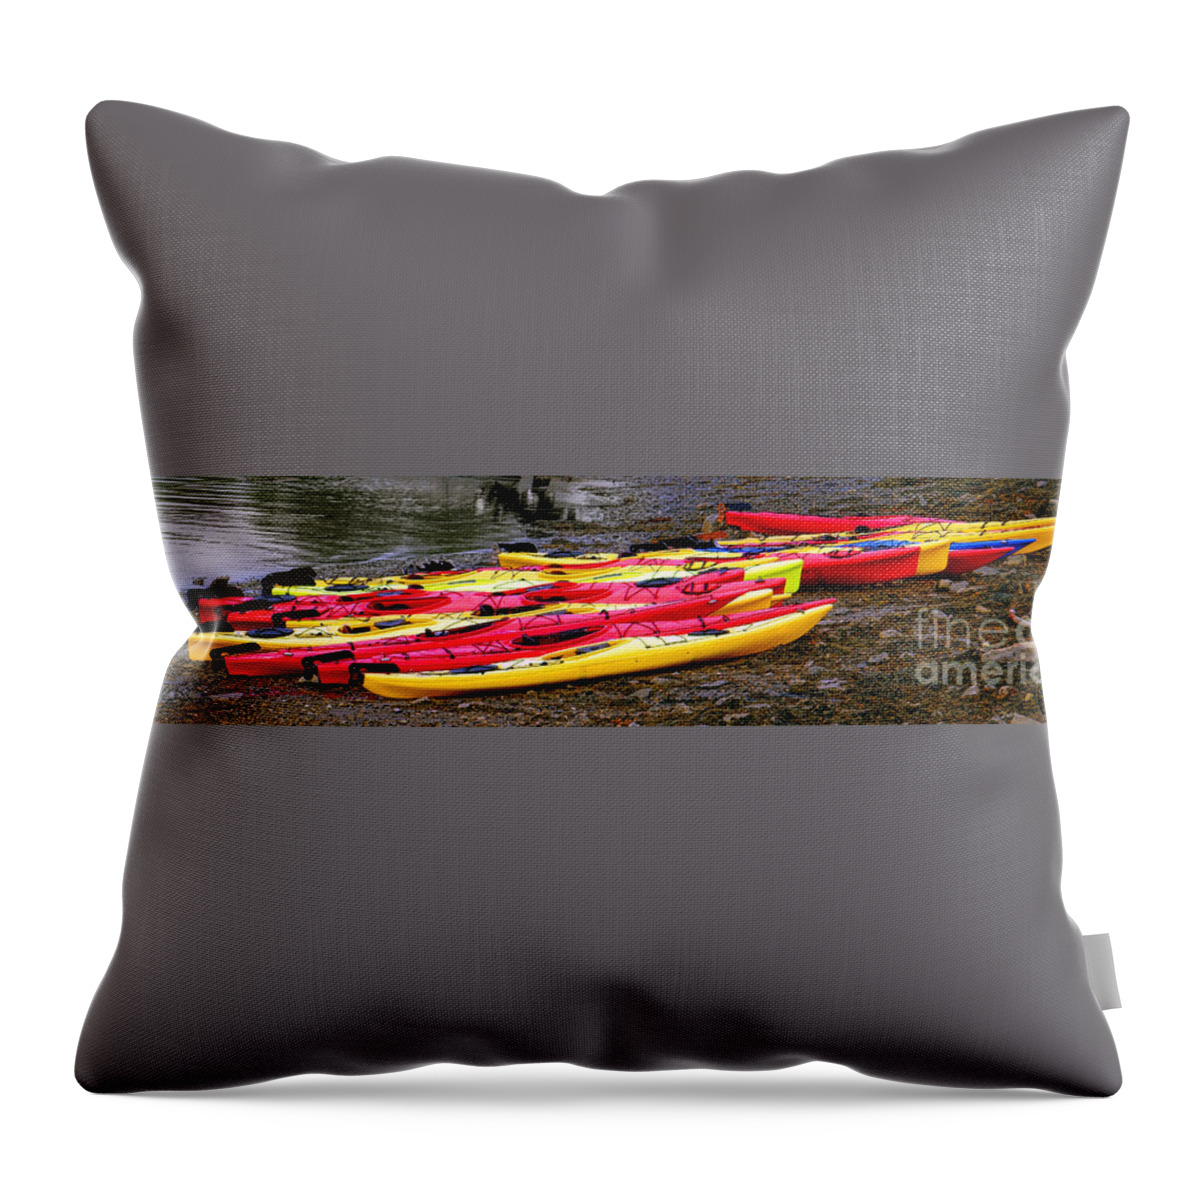 Kayaks Throw Pillow featuring the photograph School of Kayaks by Olivier Le Queinec